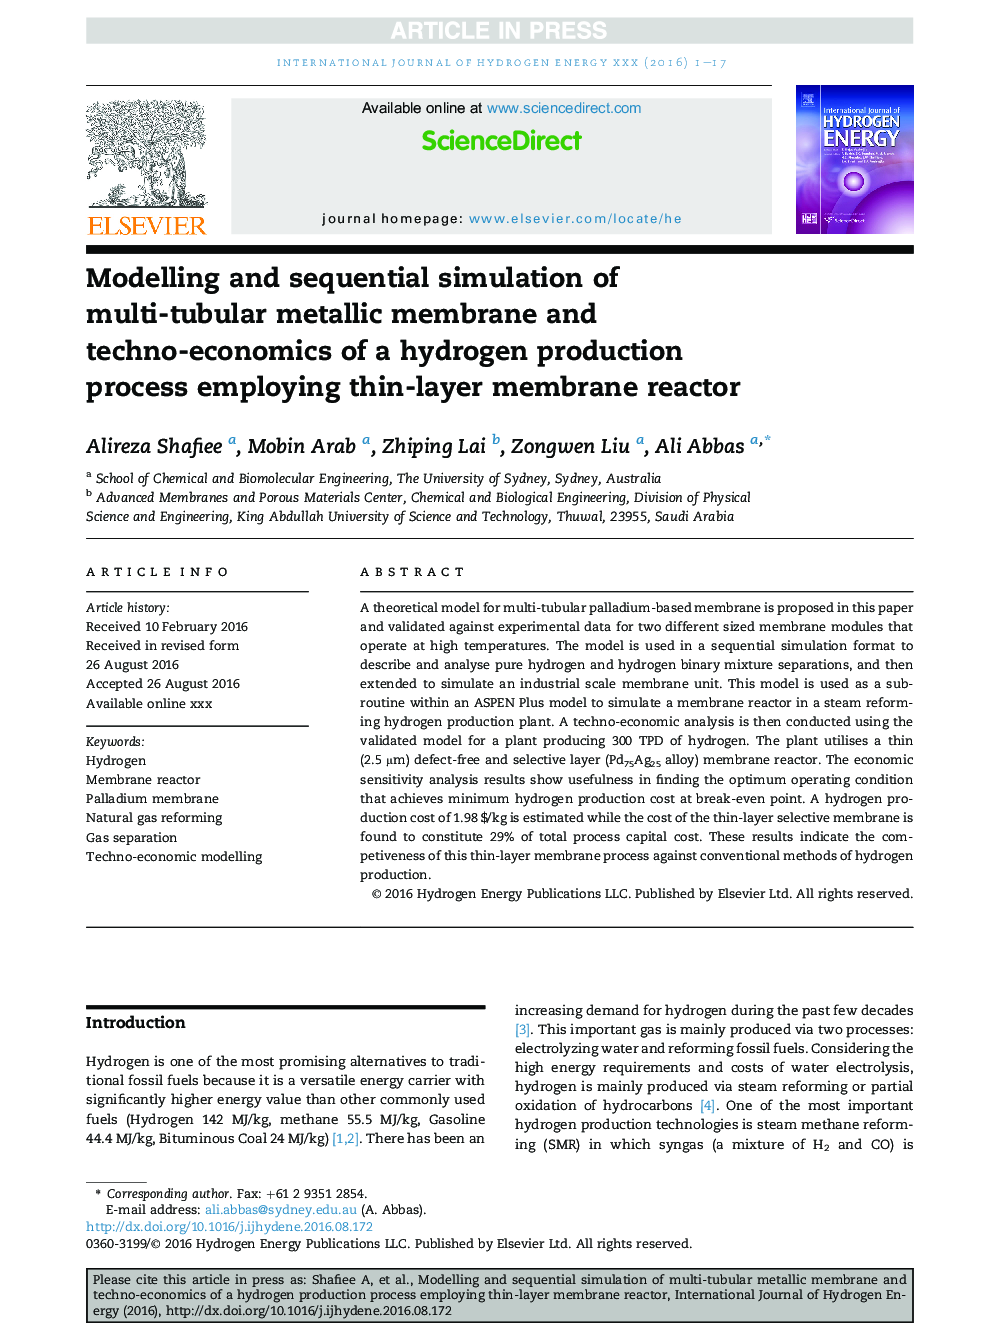 Modelling and sequential simulation of multi-tubular metallic membrane and techno-economics of a hydrogen production process employing thin-layer membrane reactor